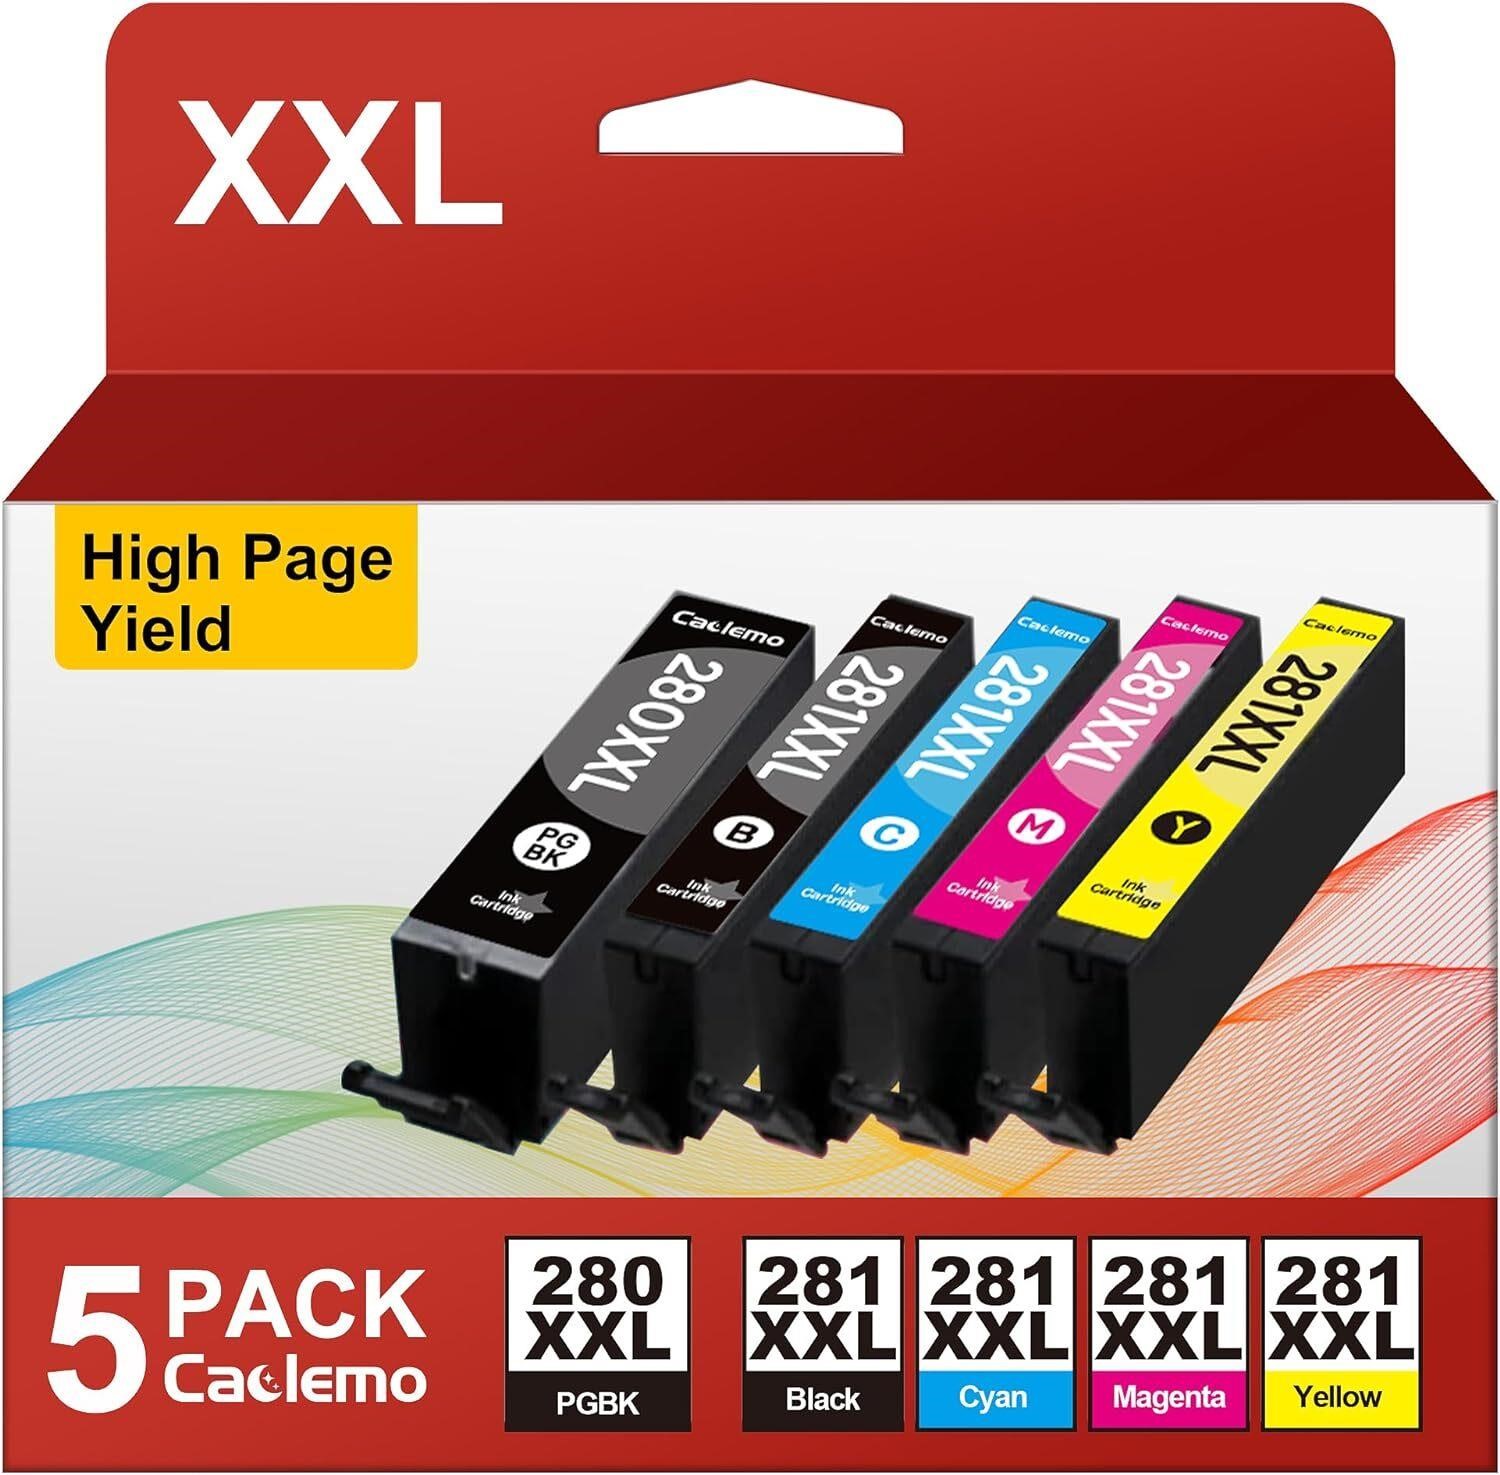 $35  Ink Cartridge for Canon 280/281  5 Pack